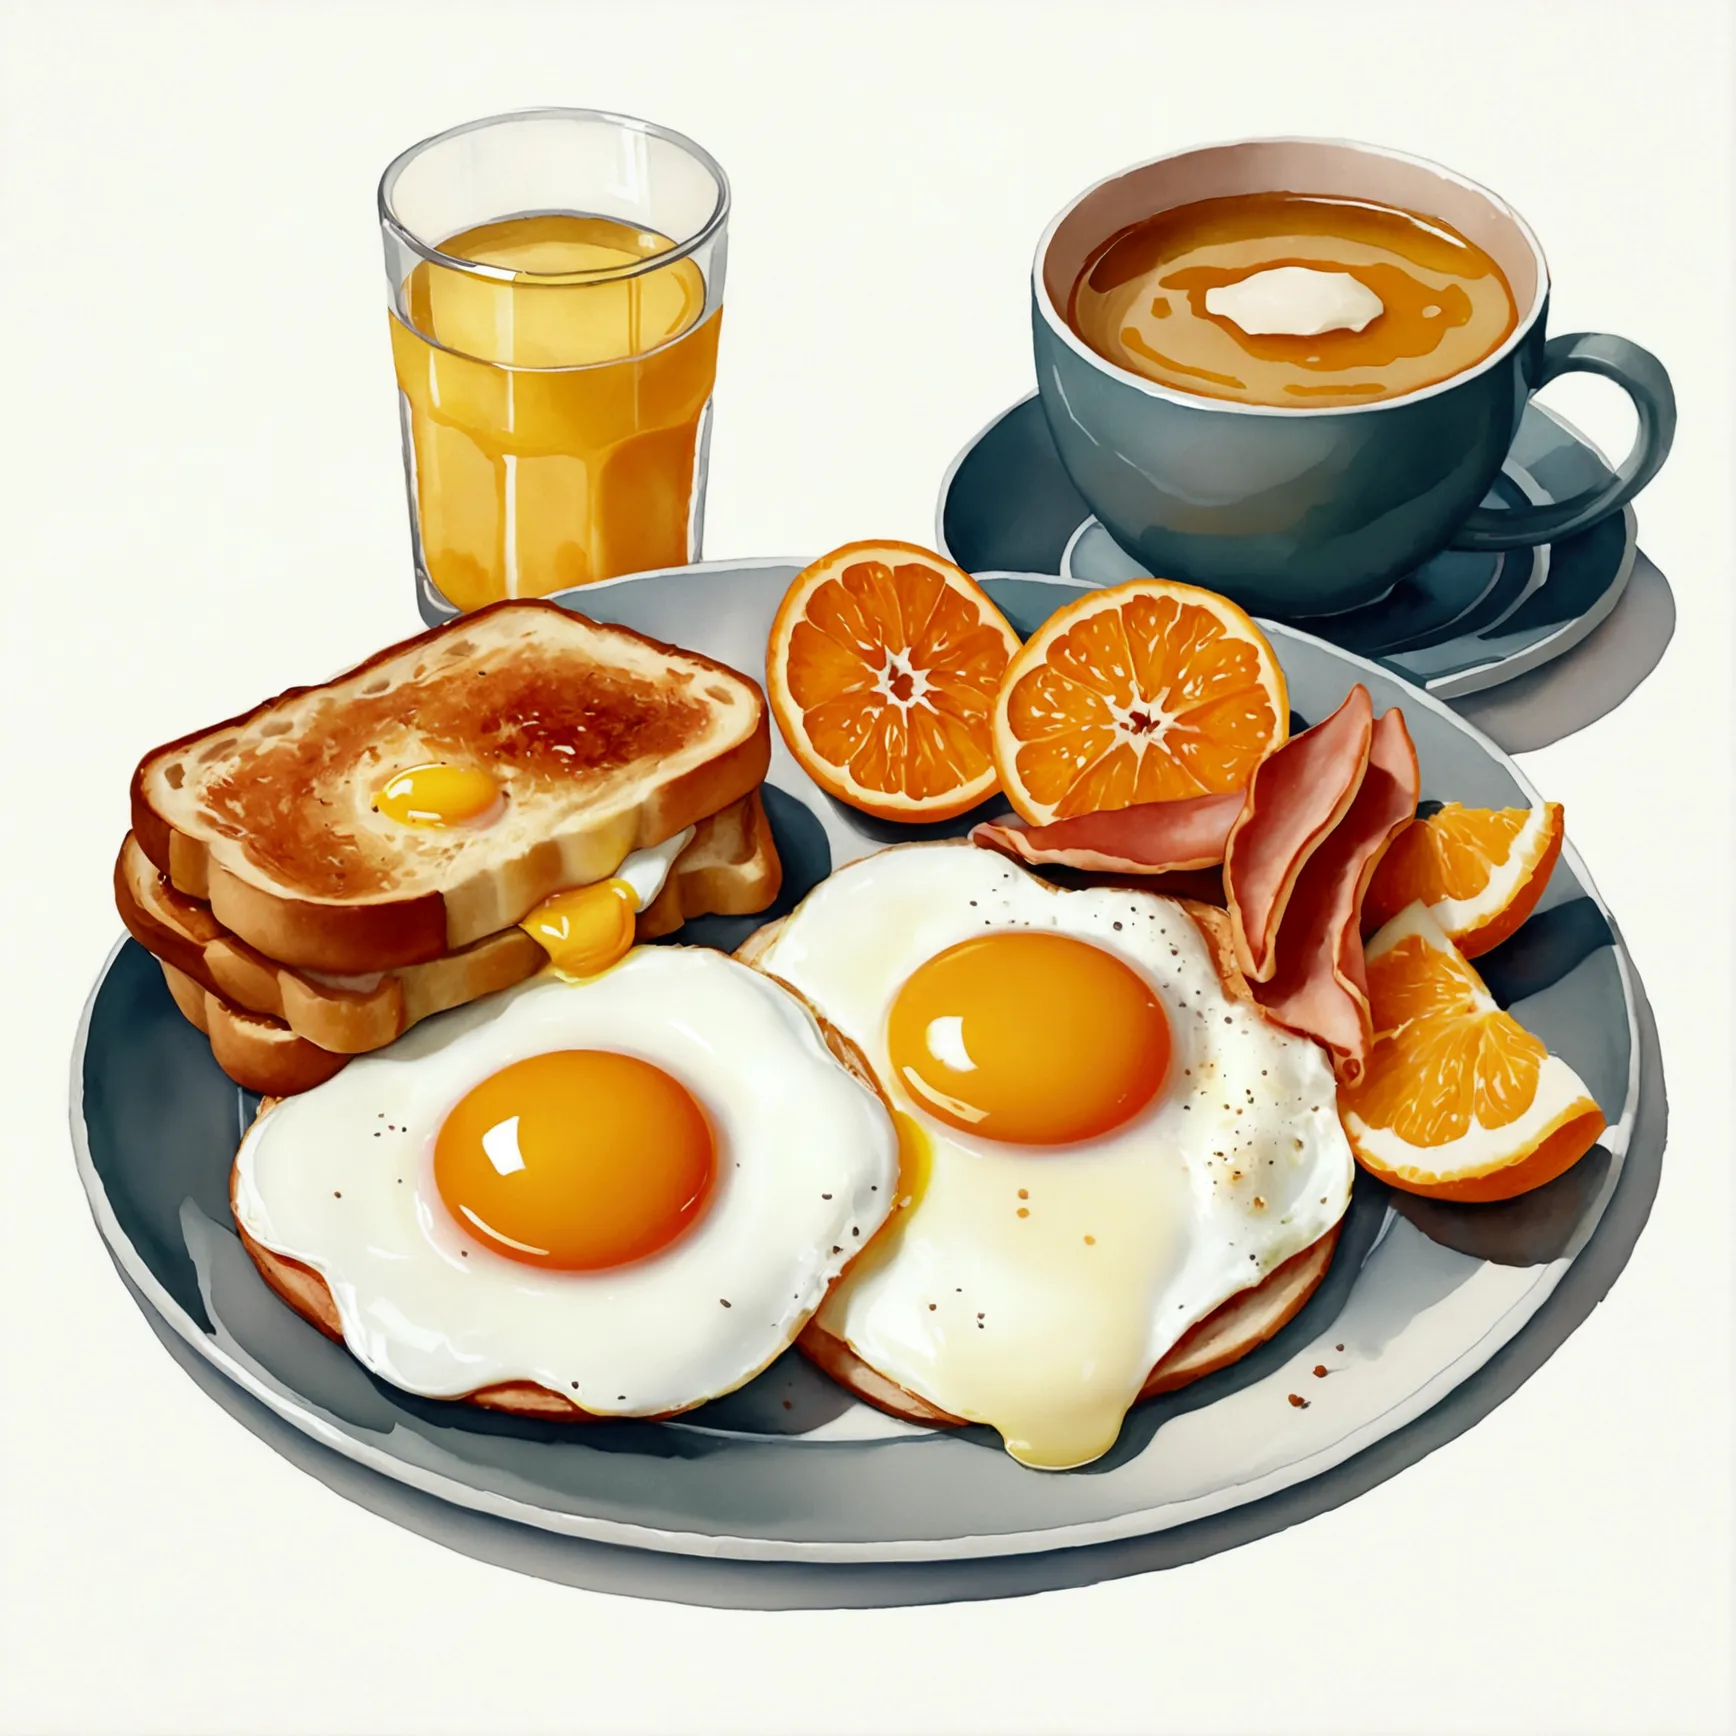 there is a plate of breakfast food with orange slices and eggs, oil painting of breakfast, amazing food illustration, hearty bre...